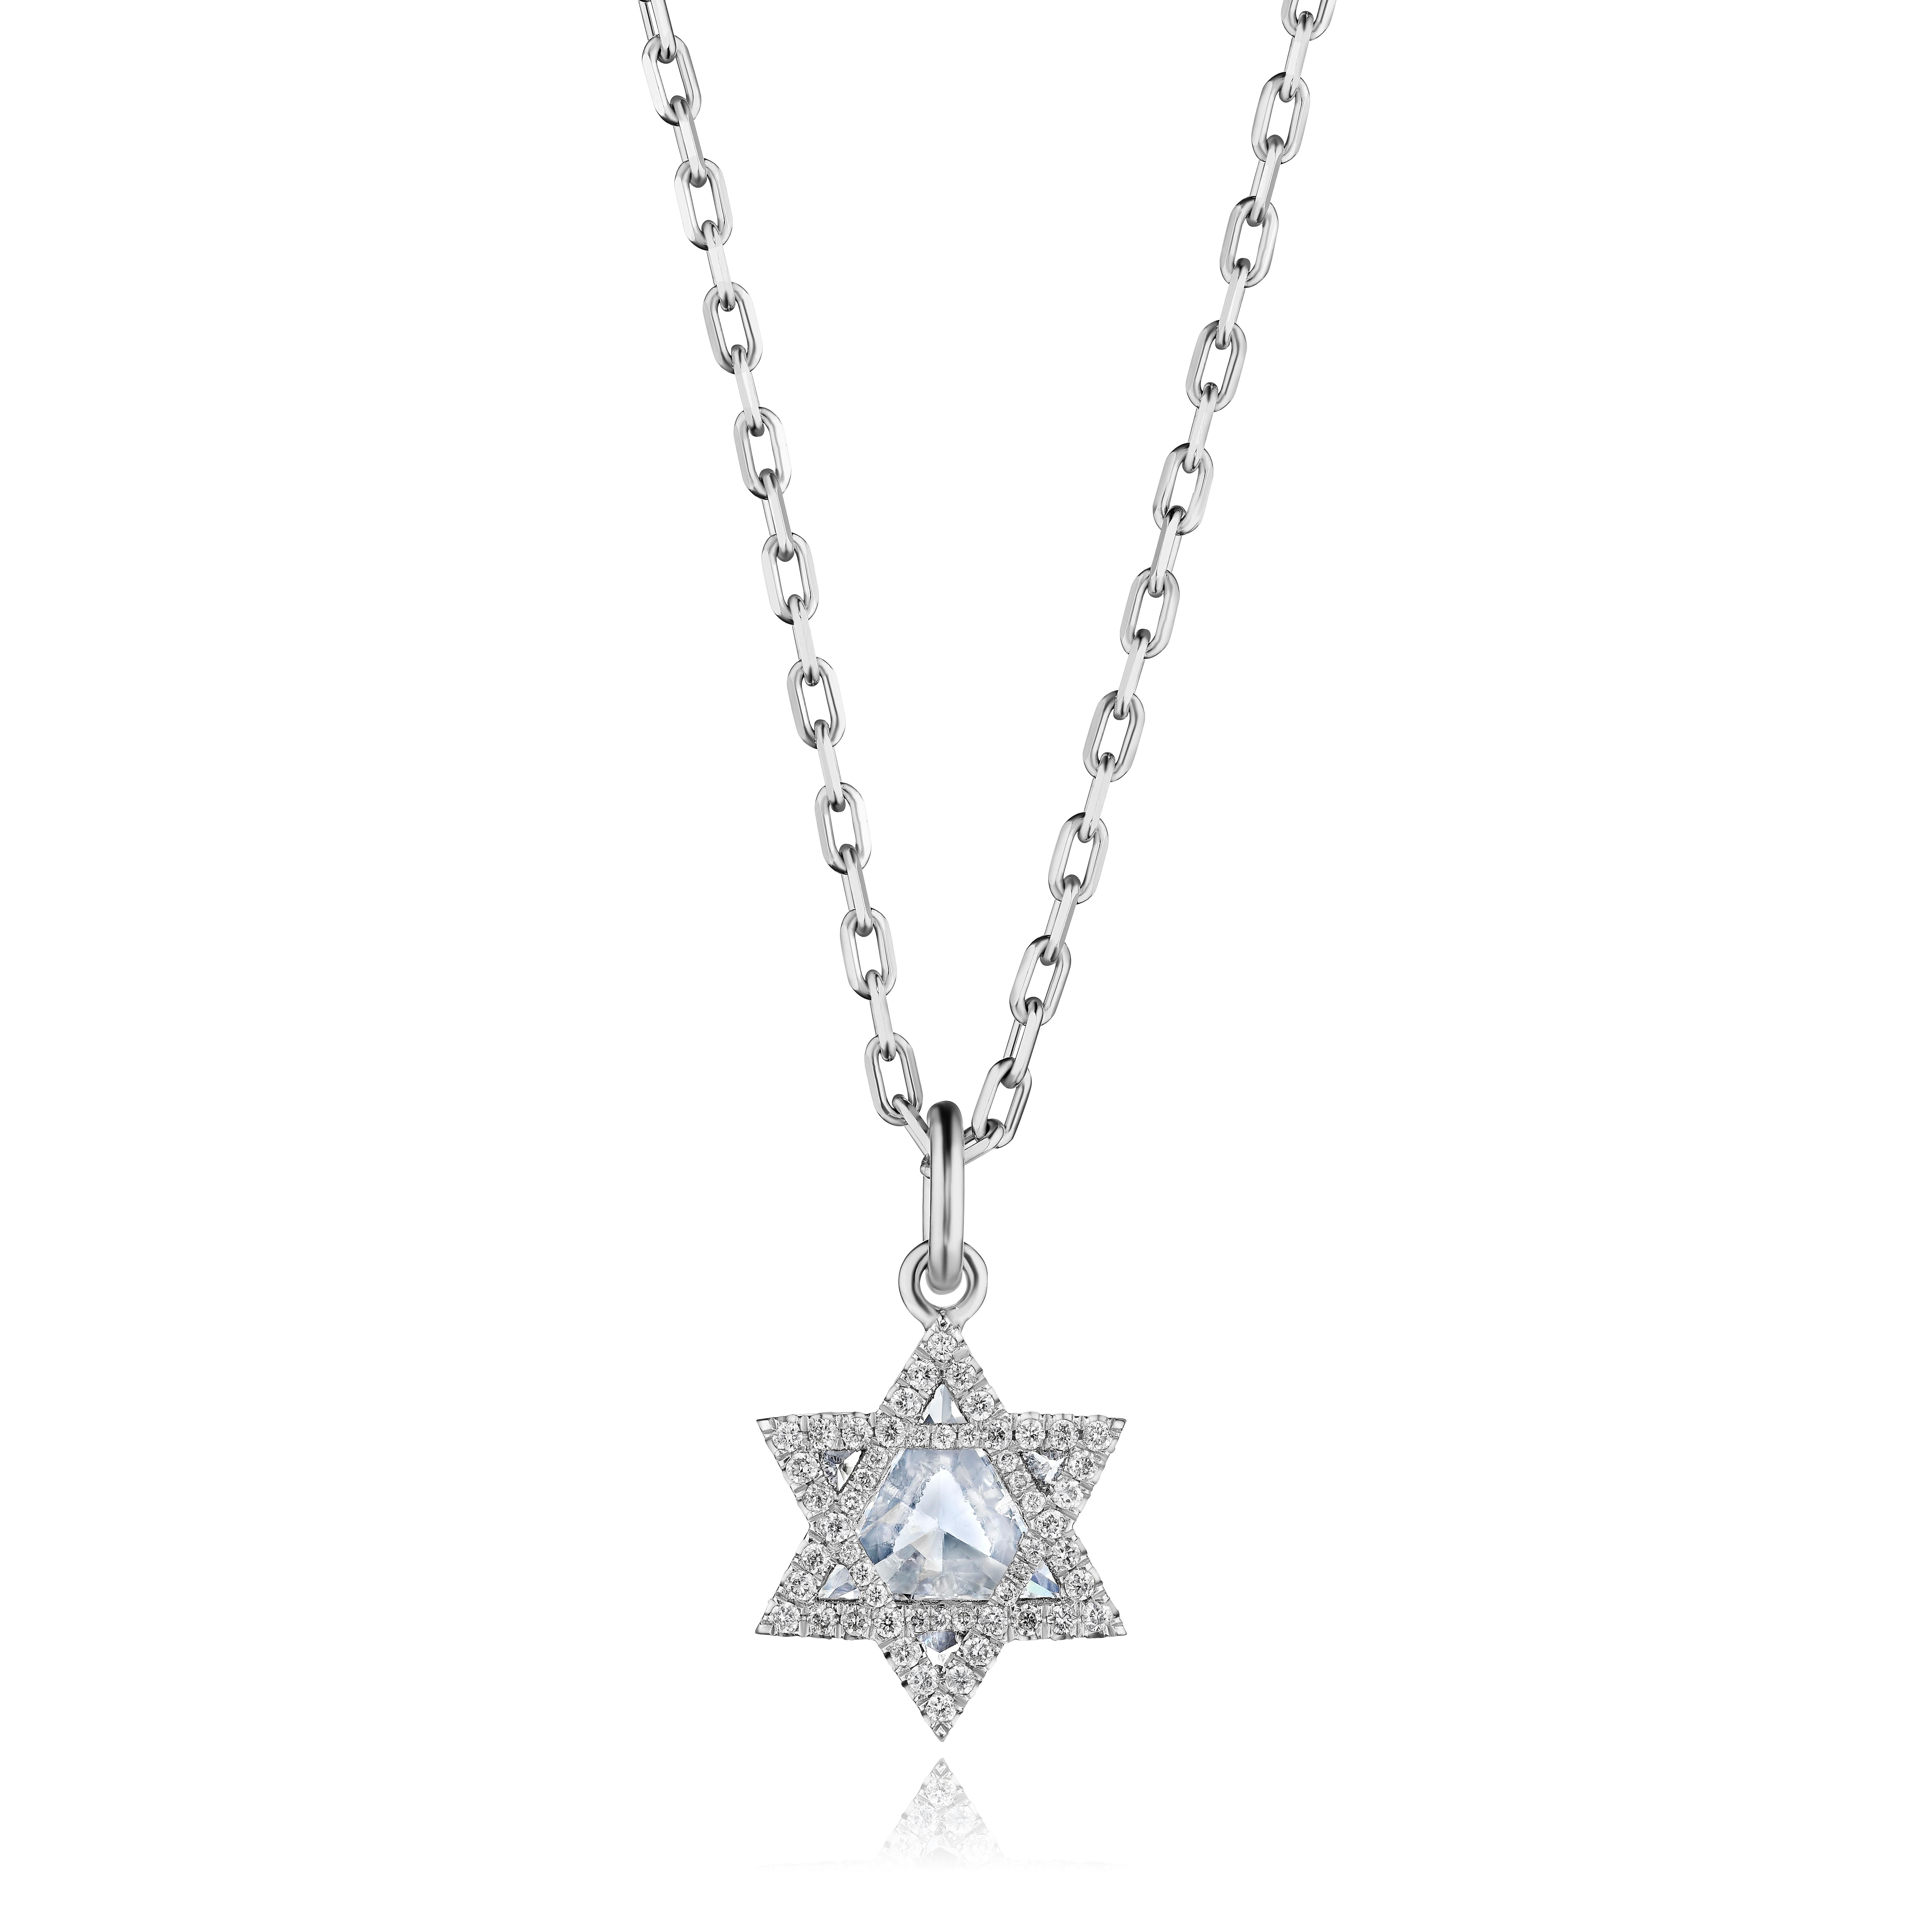 Triangle Diamond center weighing 1.57 Carats with 3 more triangles to for the full 6 points of a Star of David. 
Diamonds set at the reverse for versatility and extra detail. 
1.57 Carat Diamond certified as D color I1 clarity. 
Set in Platinum
20